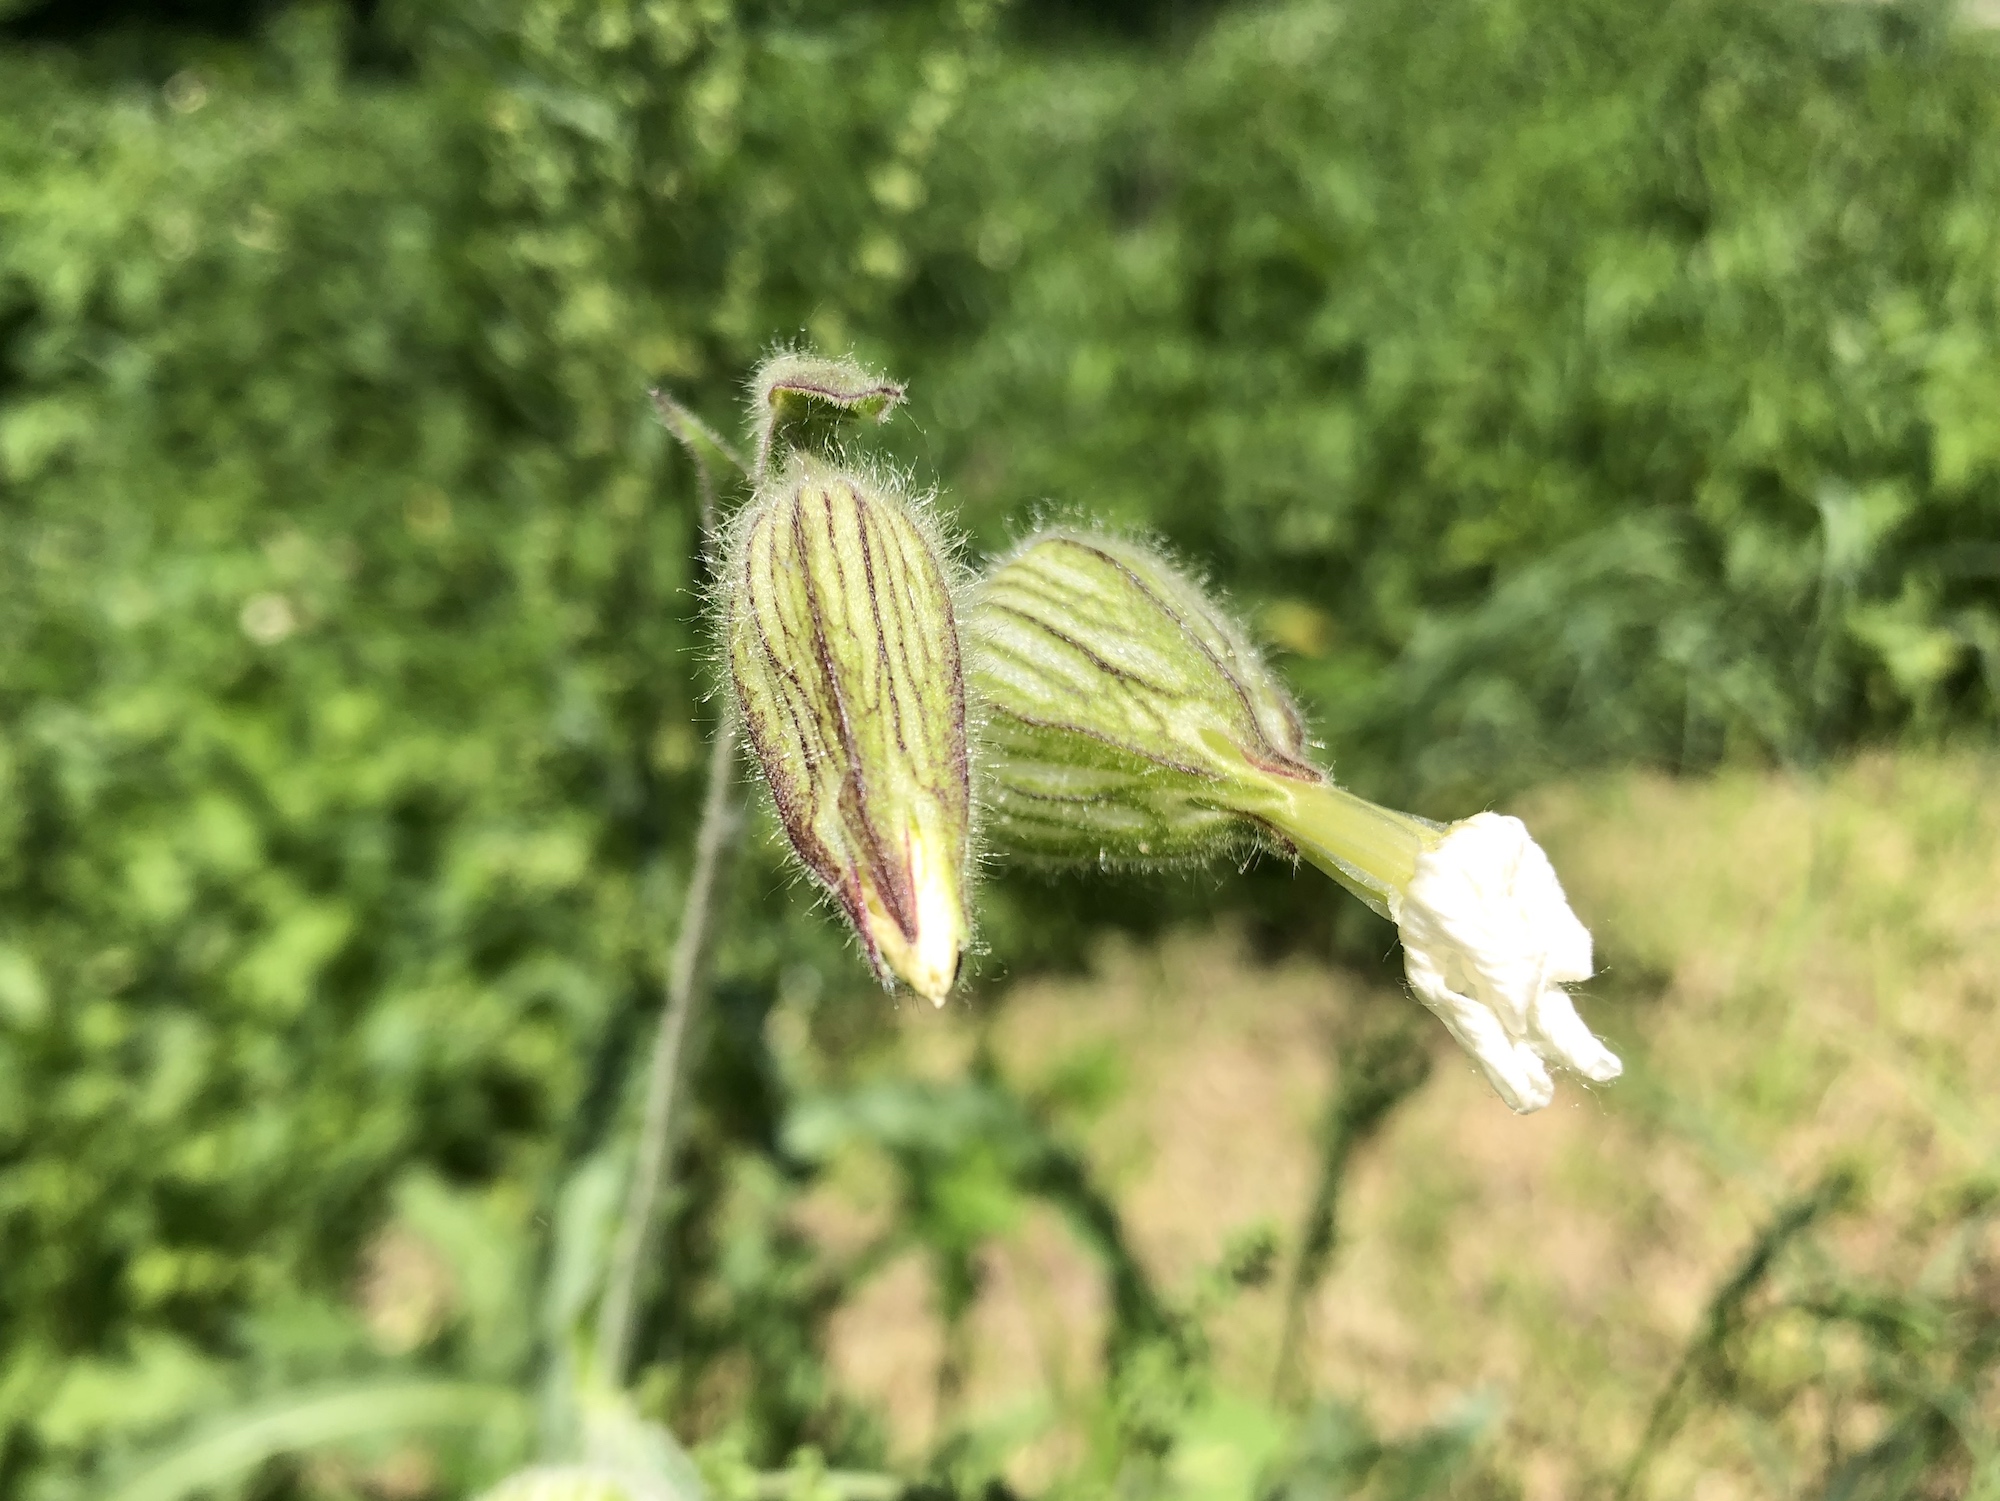  White Campion closed up for the day by Marion Dunn on June 10, 2019.